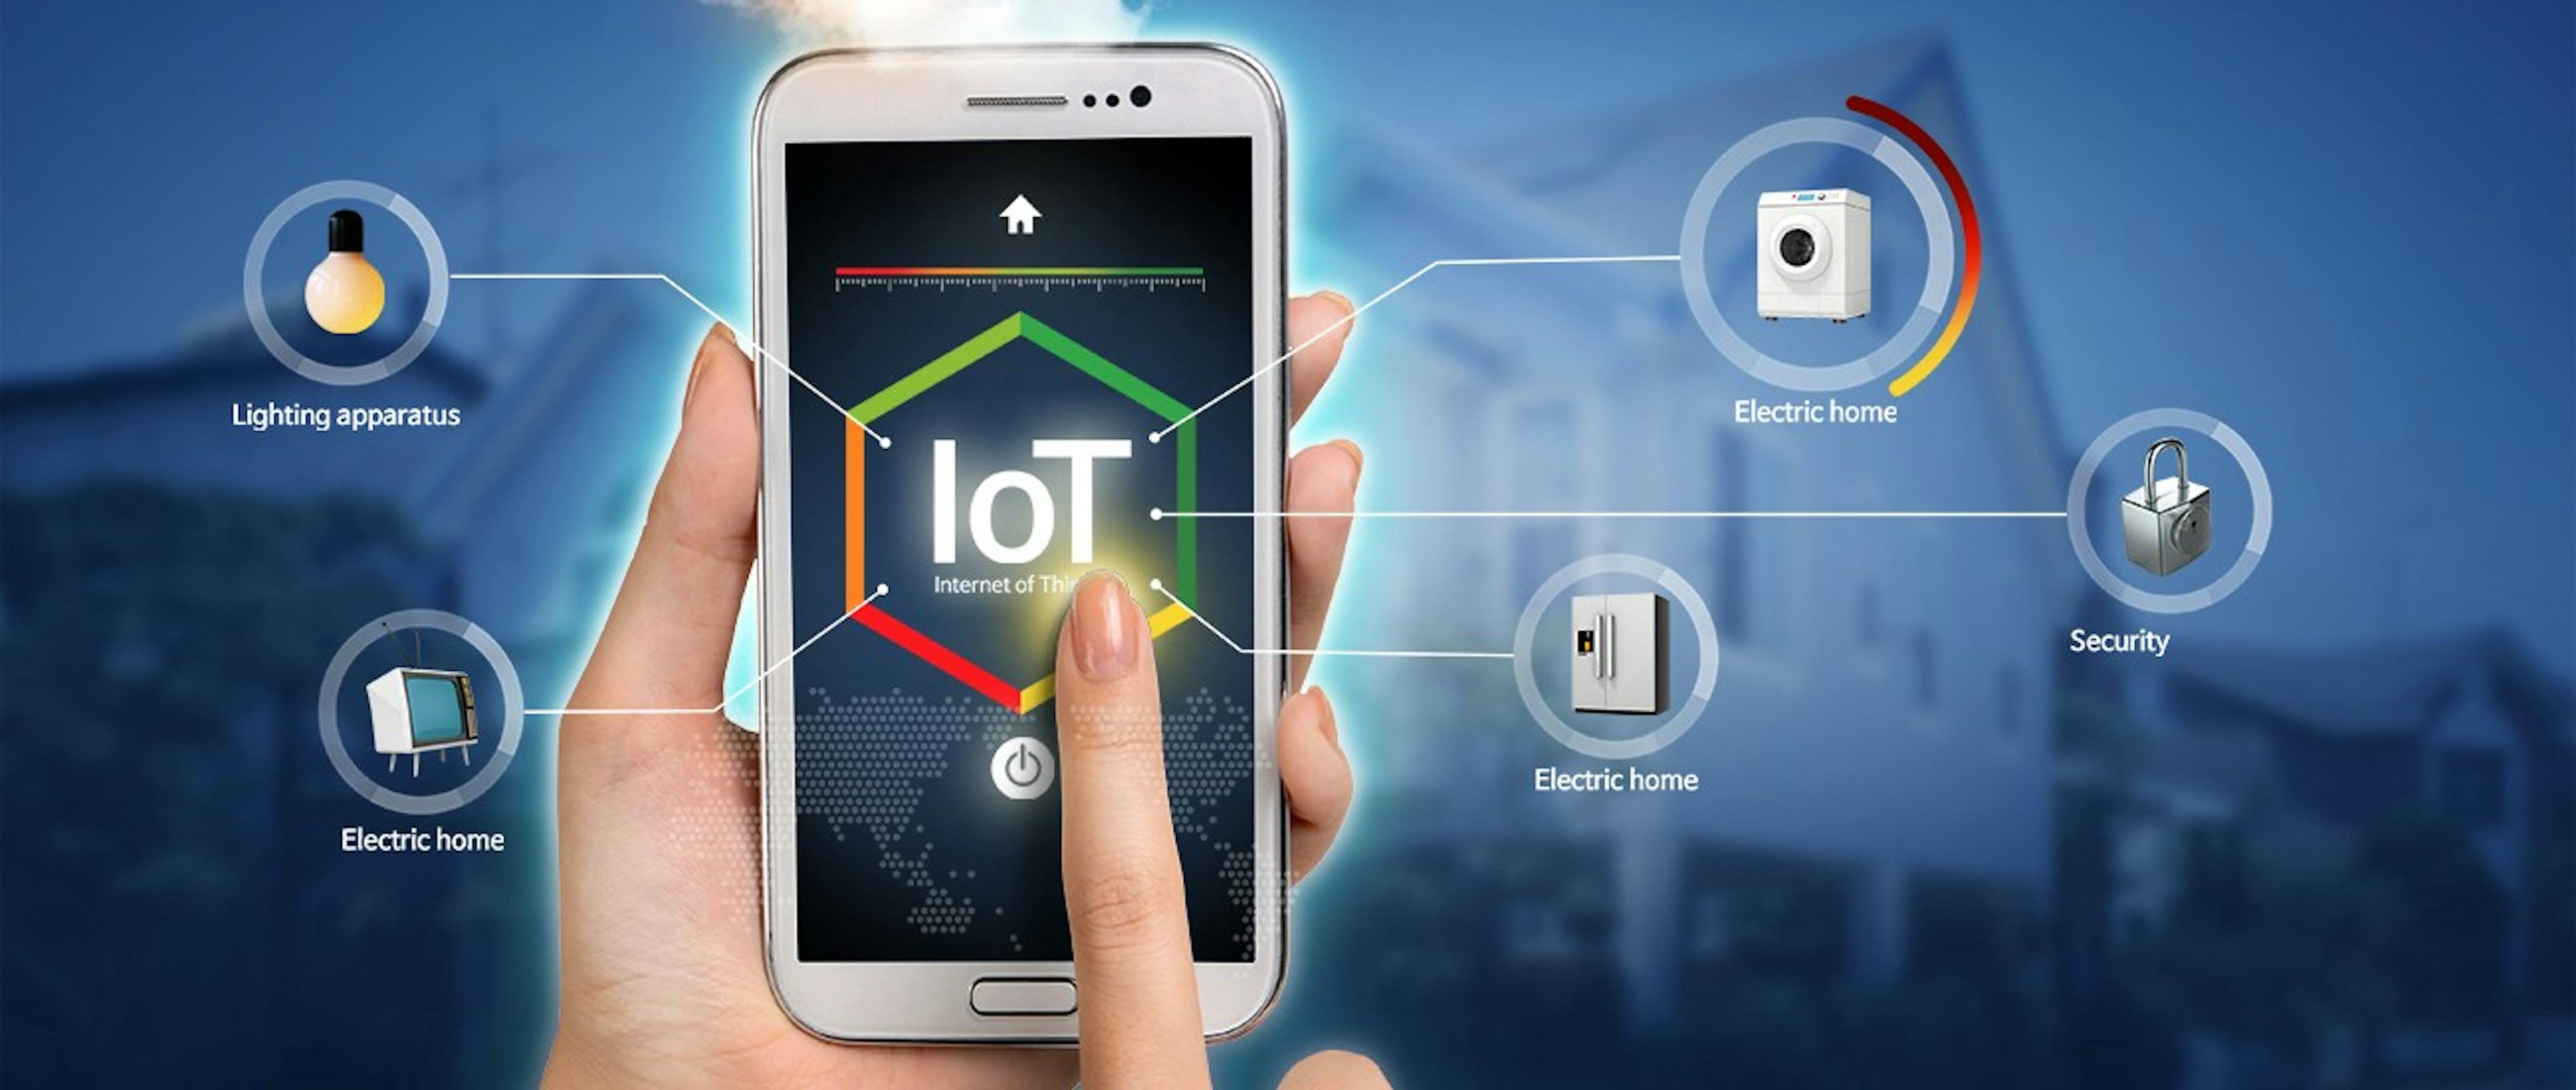 featured image - How Internet of Things is changing things at the workplace